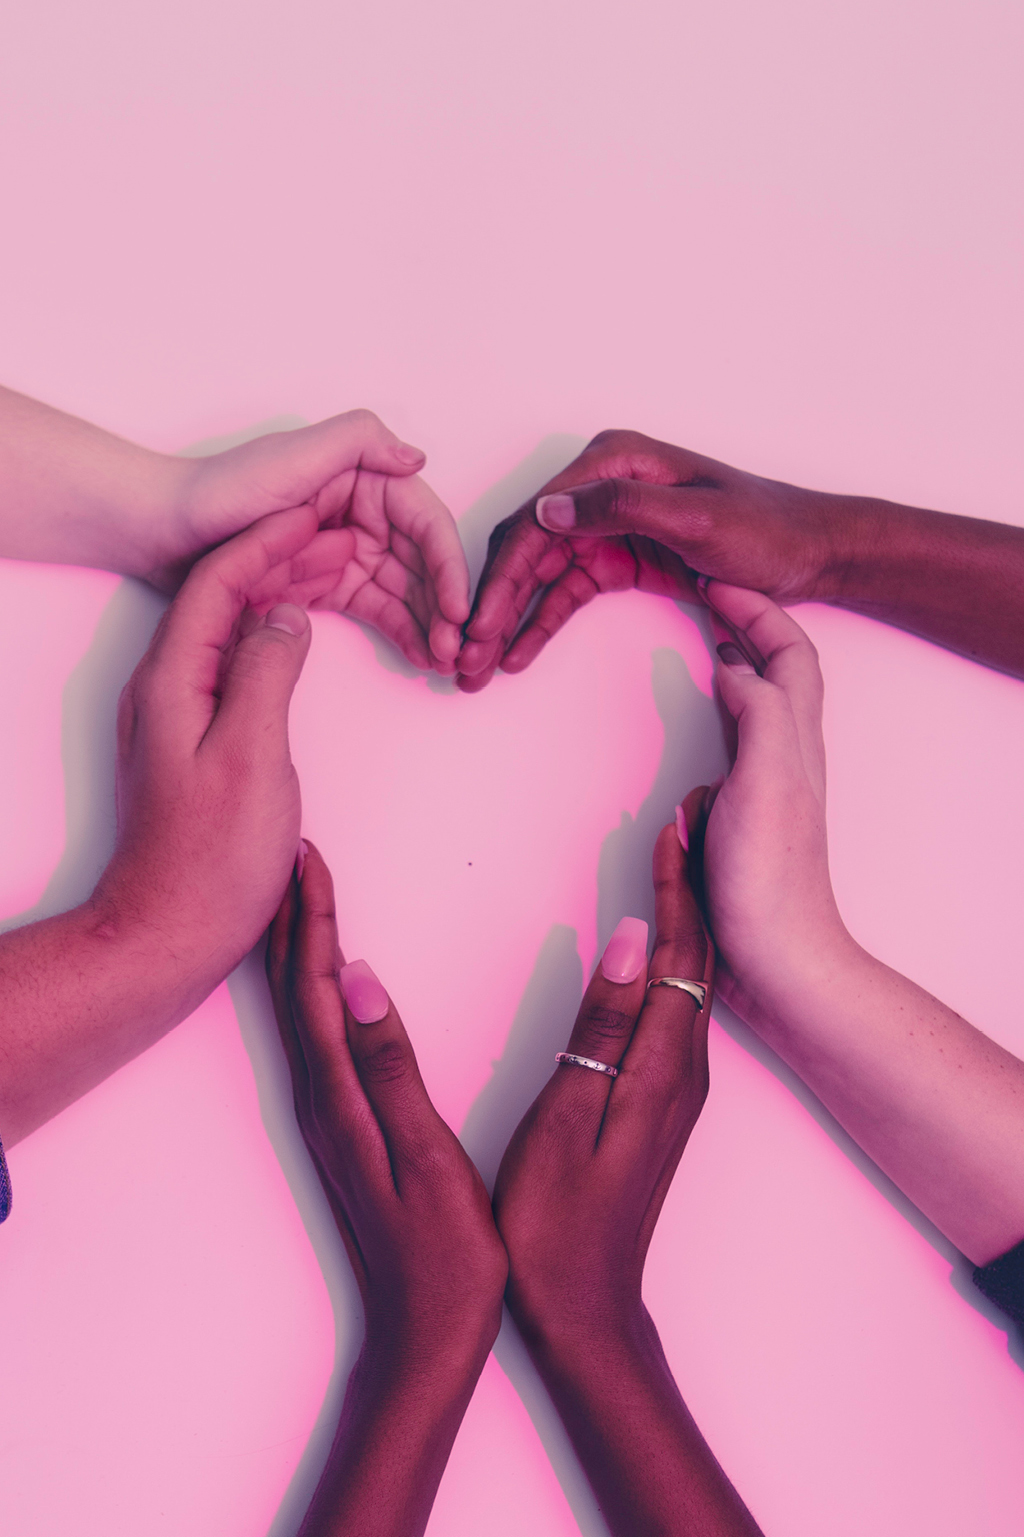 Multi-ethnic hands in the shape of a heart on a pink background